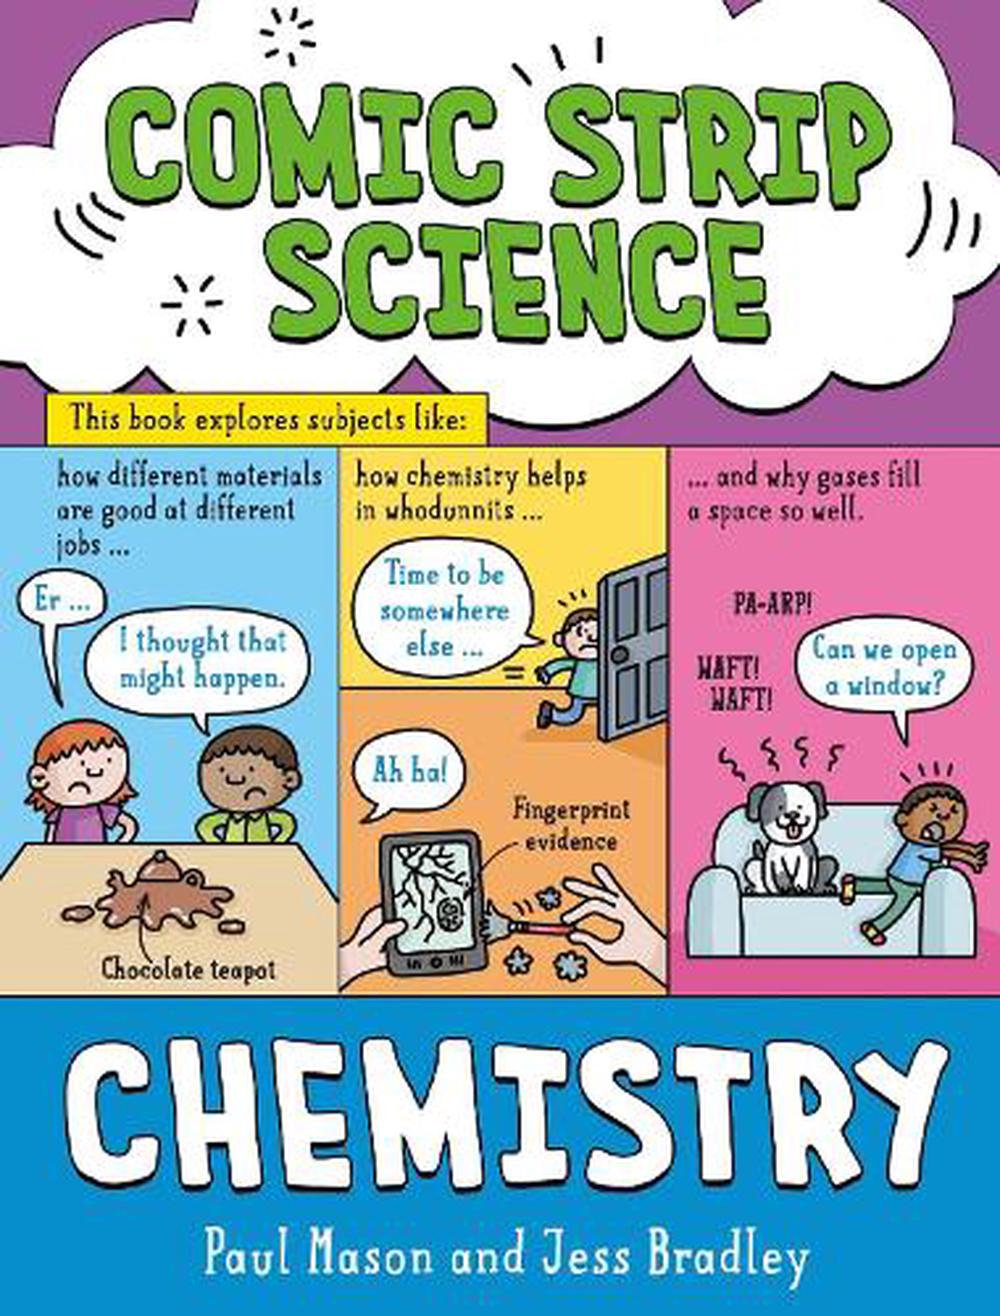 by　Nile　Paul　Comic　Strip　at　9781526321091　Buy　online　Science:　Chemistry　Hardcover,　Mason,　The